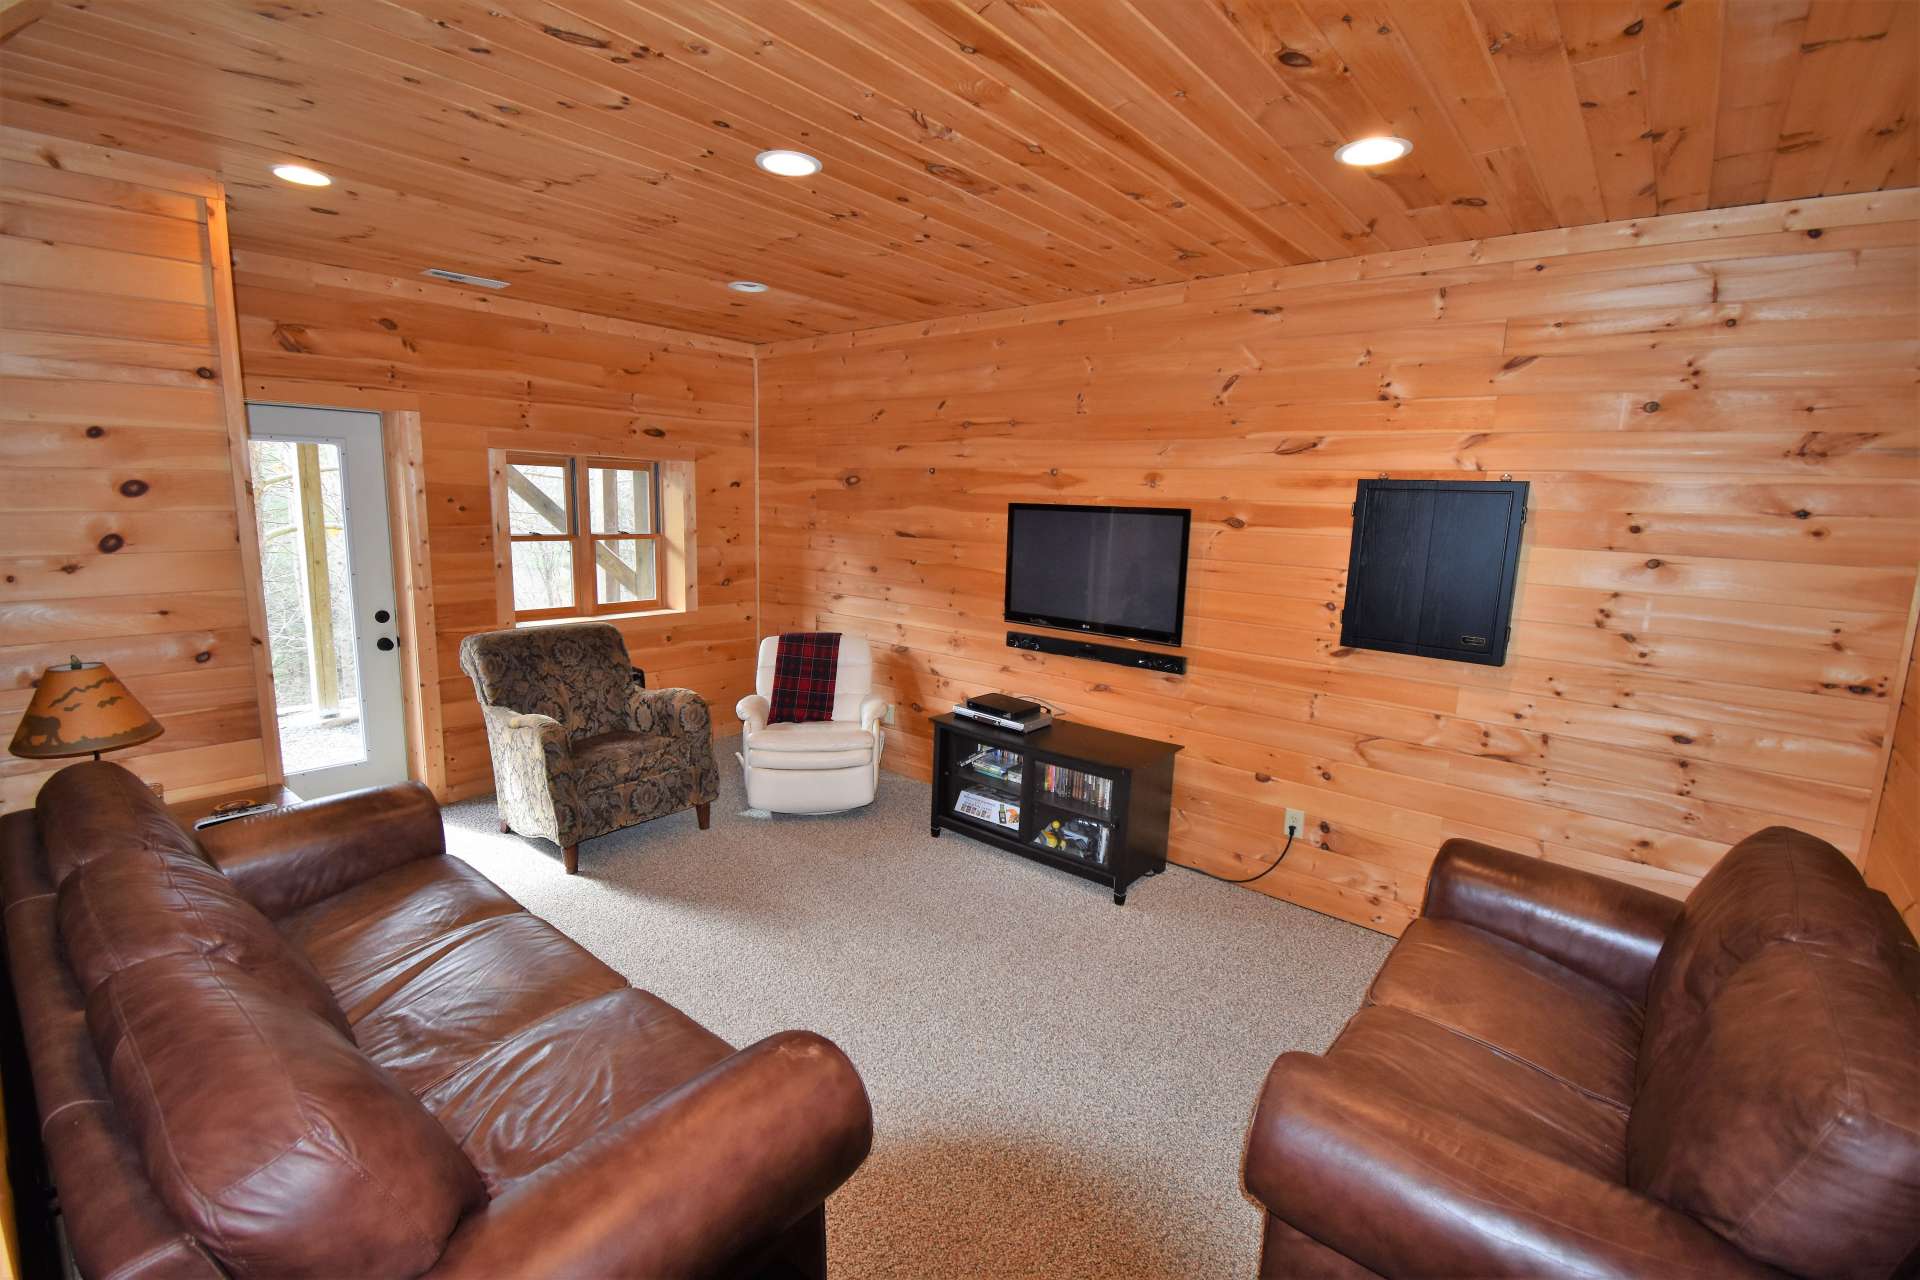 A full finished walk-out lower level offers an open space for game room, den, or media room.